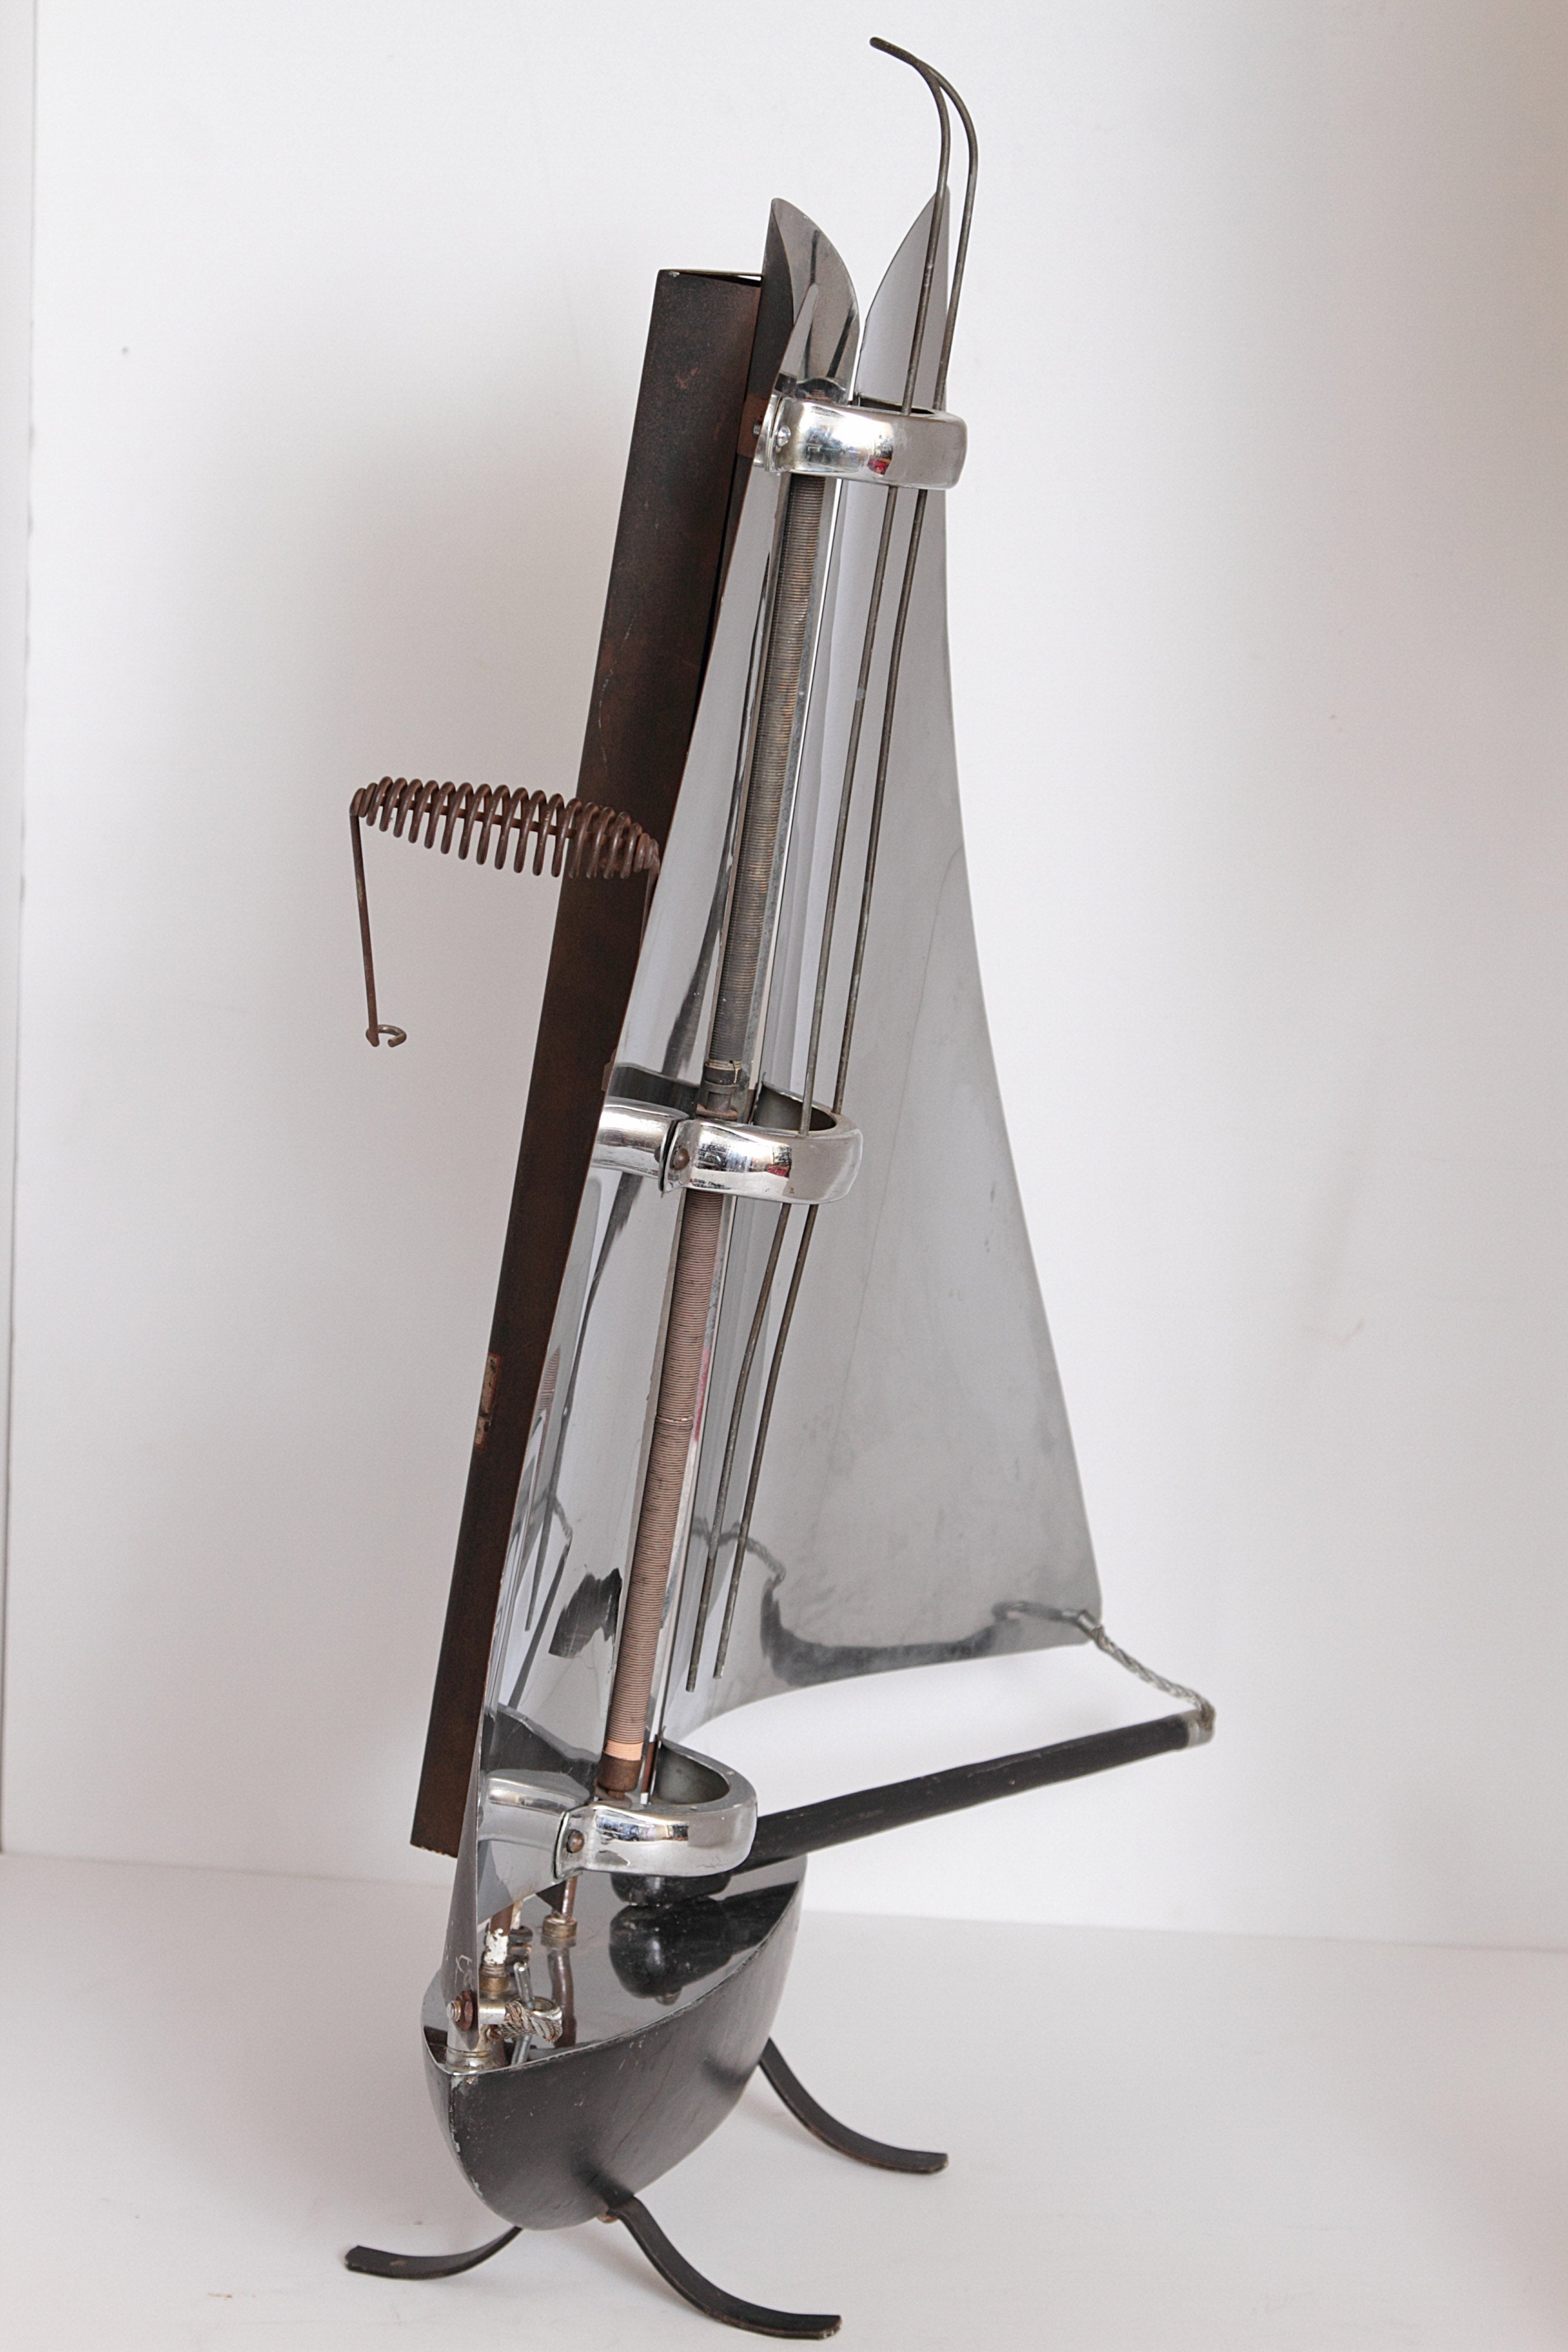 British Machine Age Sailboat Radiant Heater by Bunting Electric, circa 1930s

Iconic Art Deco Bunting 